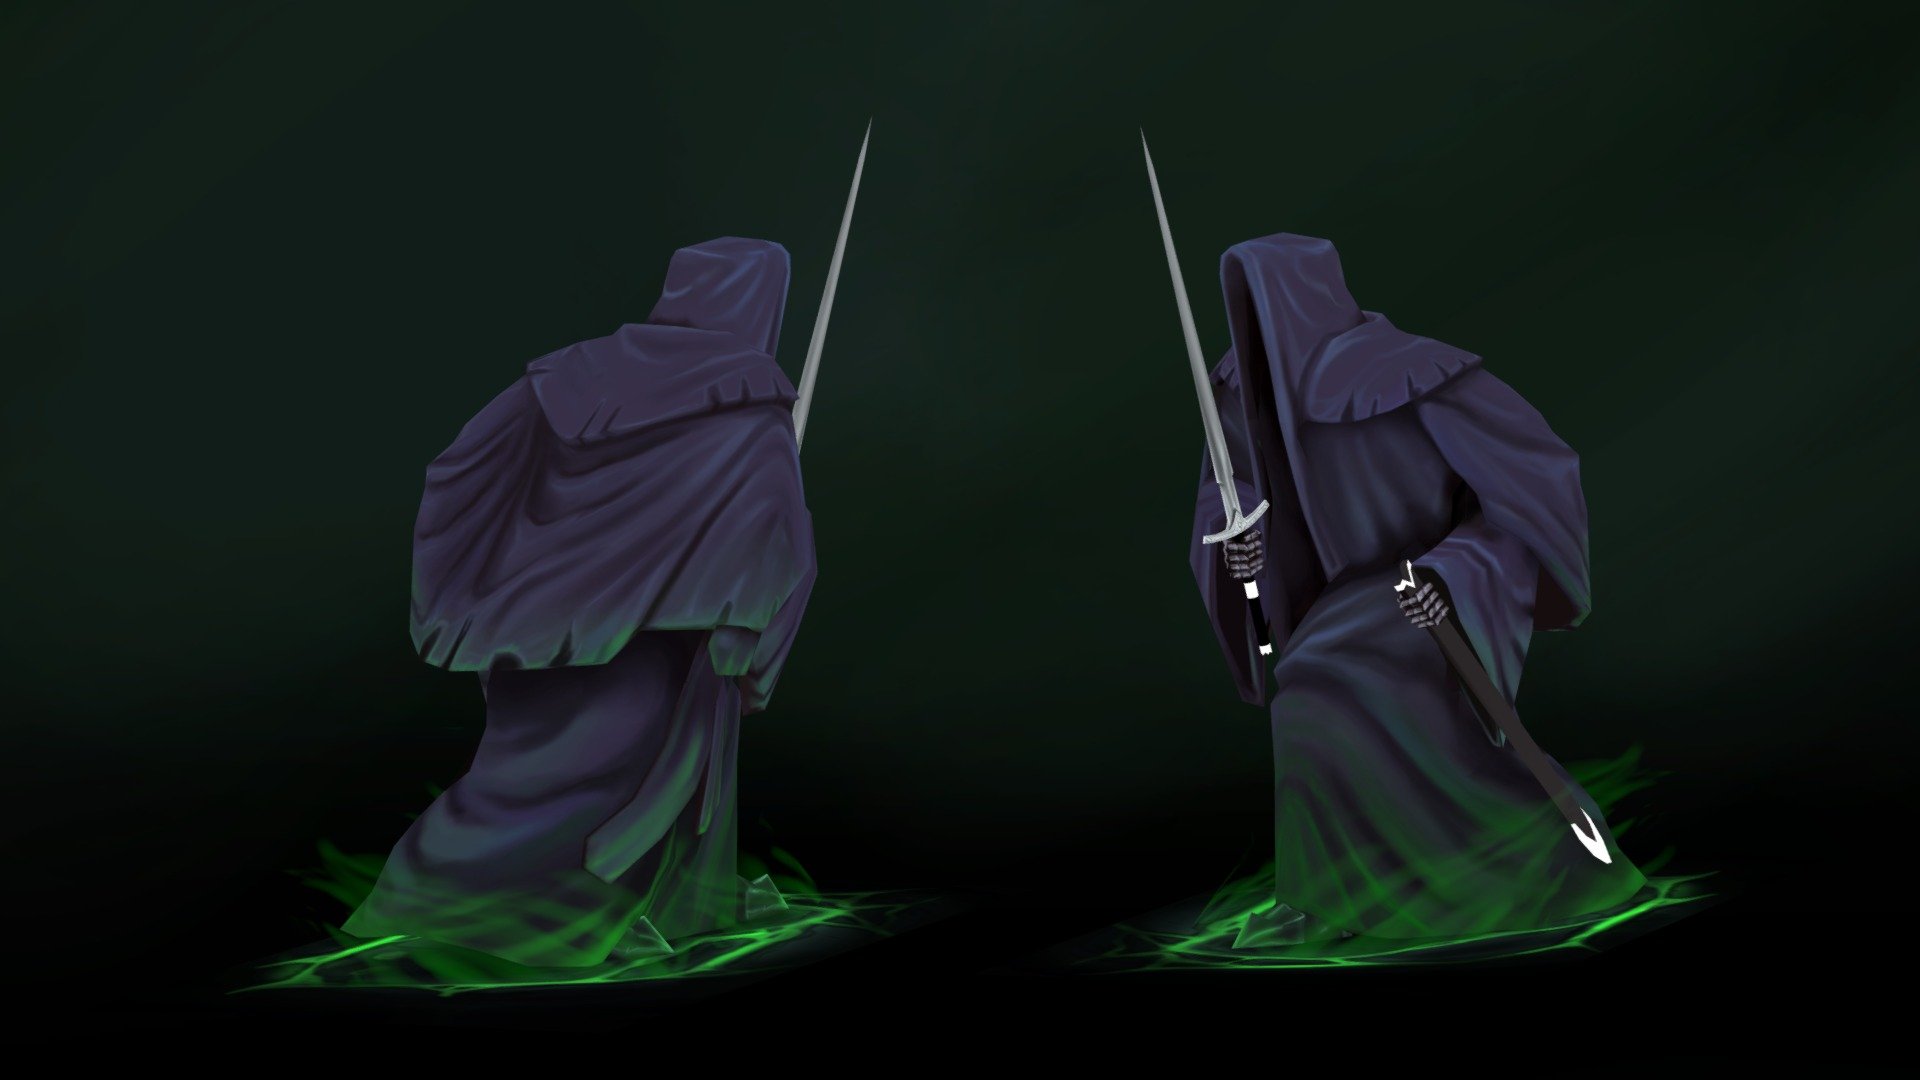 Always inspired by the traditional WoW models, always strive to do better, a hand-painted model that i did without sculpting. The model mimicking the original Witch-King miniature (sword drawing pose) from Gamesworkshop but with the sword facing upwards.

View more of me at https://www.artstation.com/h3llboy - Nazgul - 3D model by Konstantinos Pagonis (@KonstantinosPagonis) 3d model